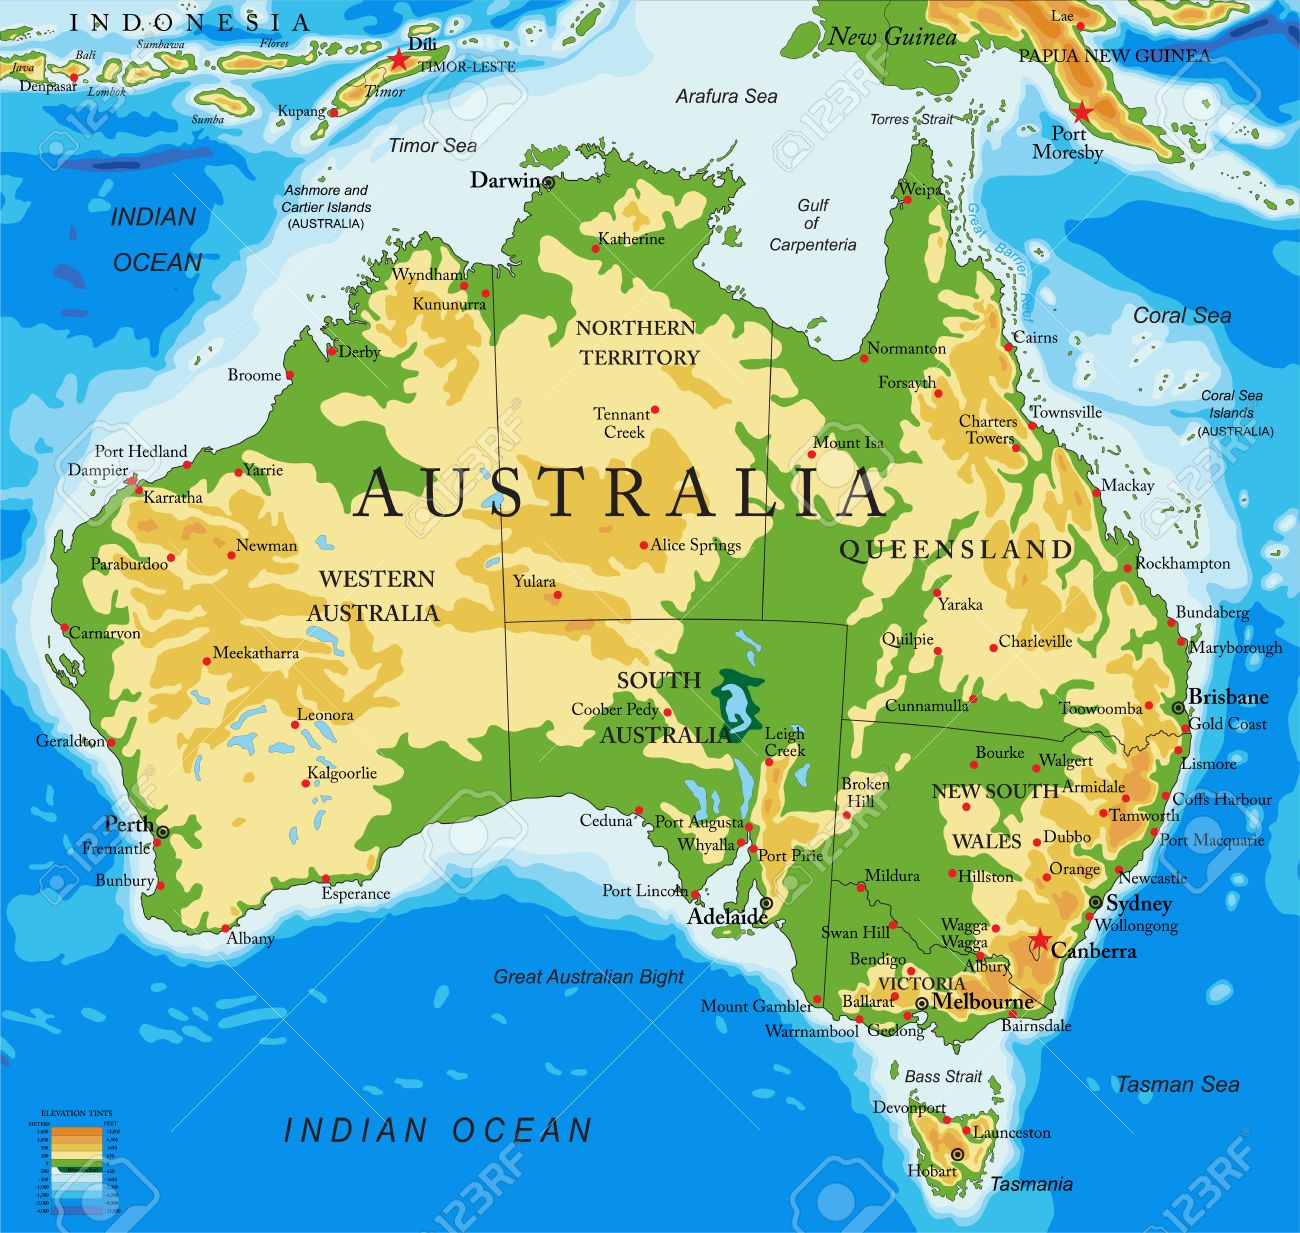 Australia-physical map - RECOPE